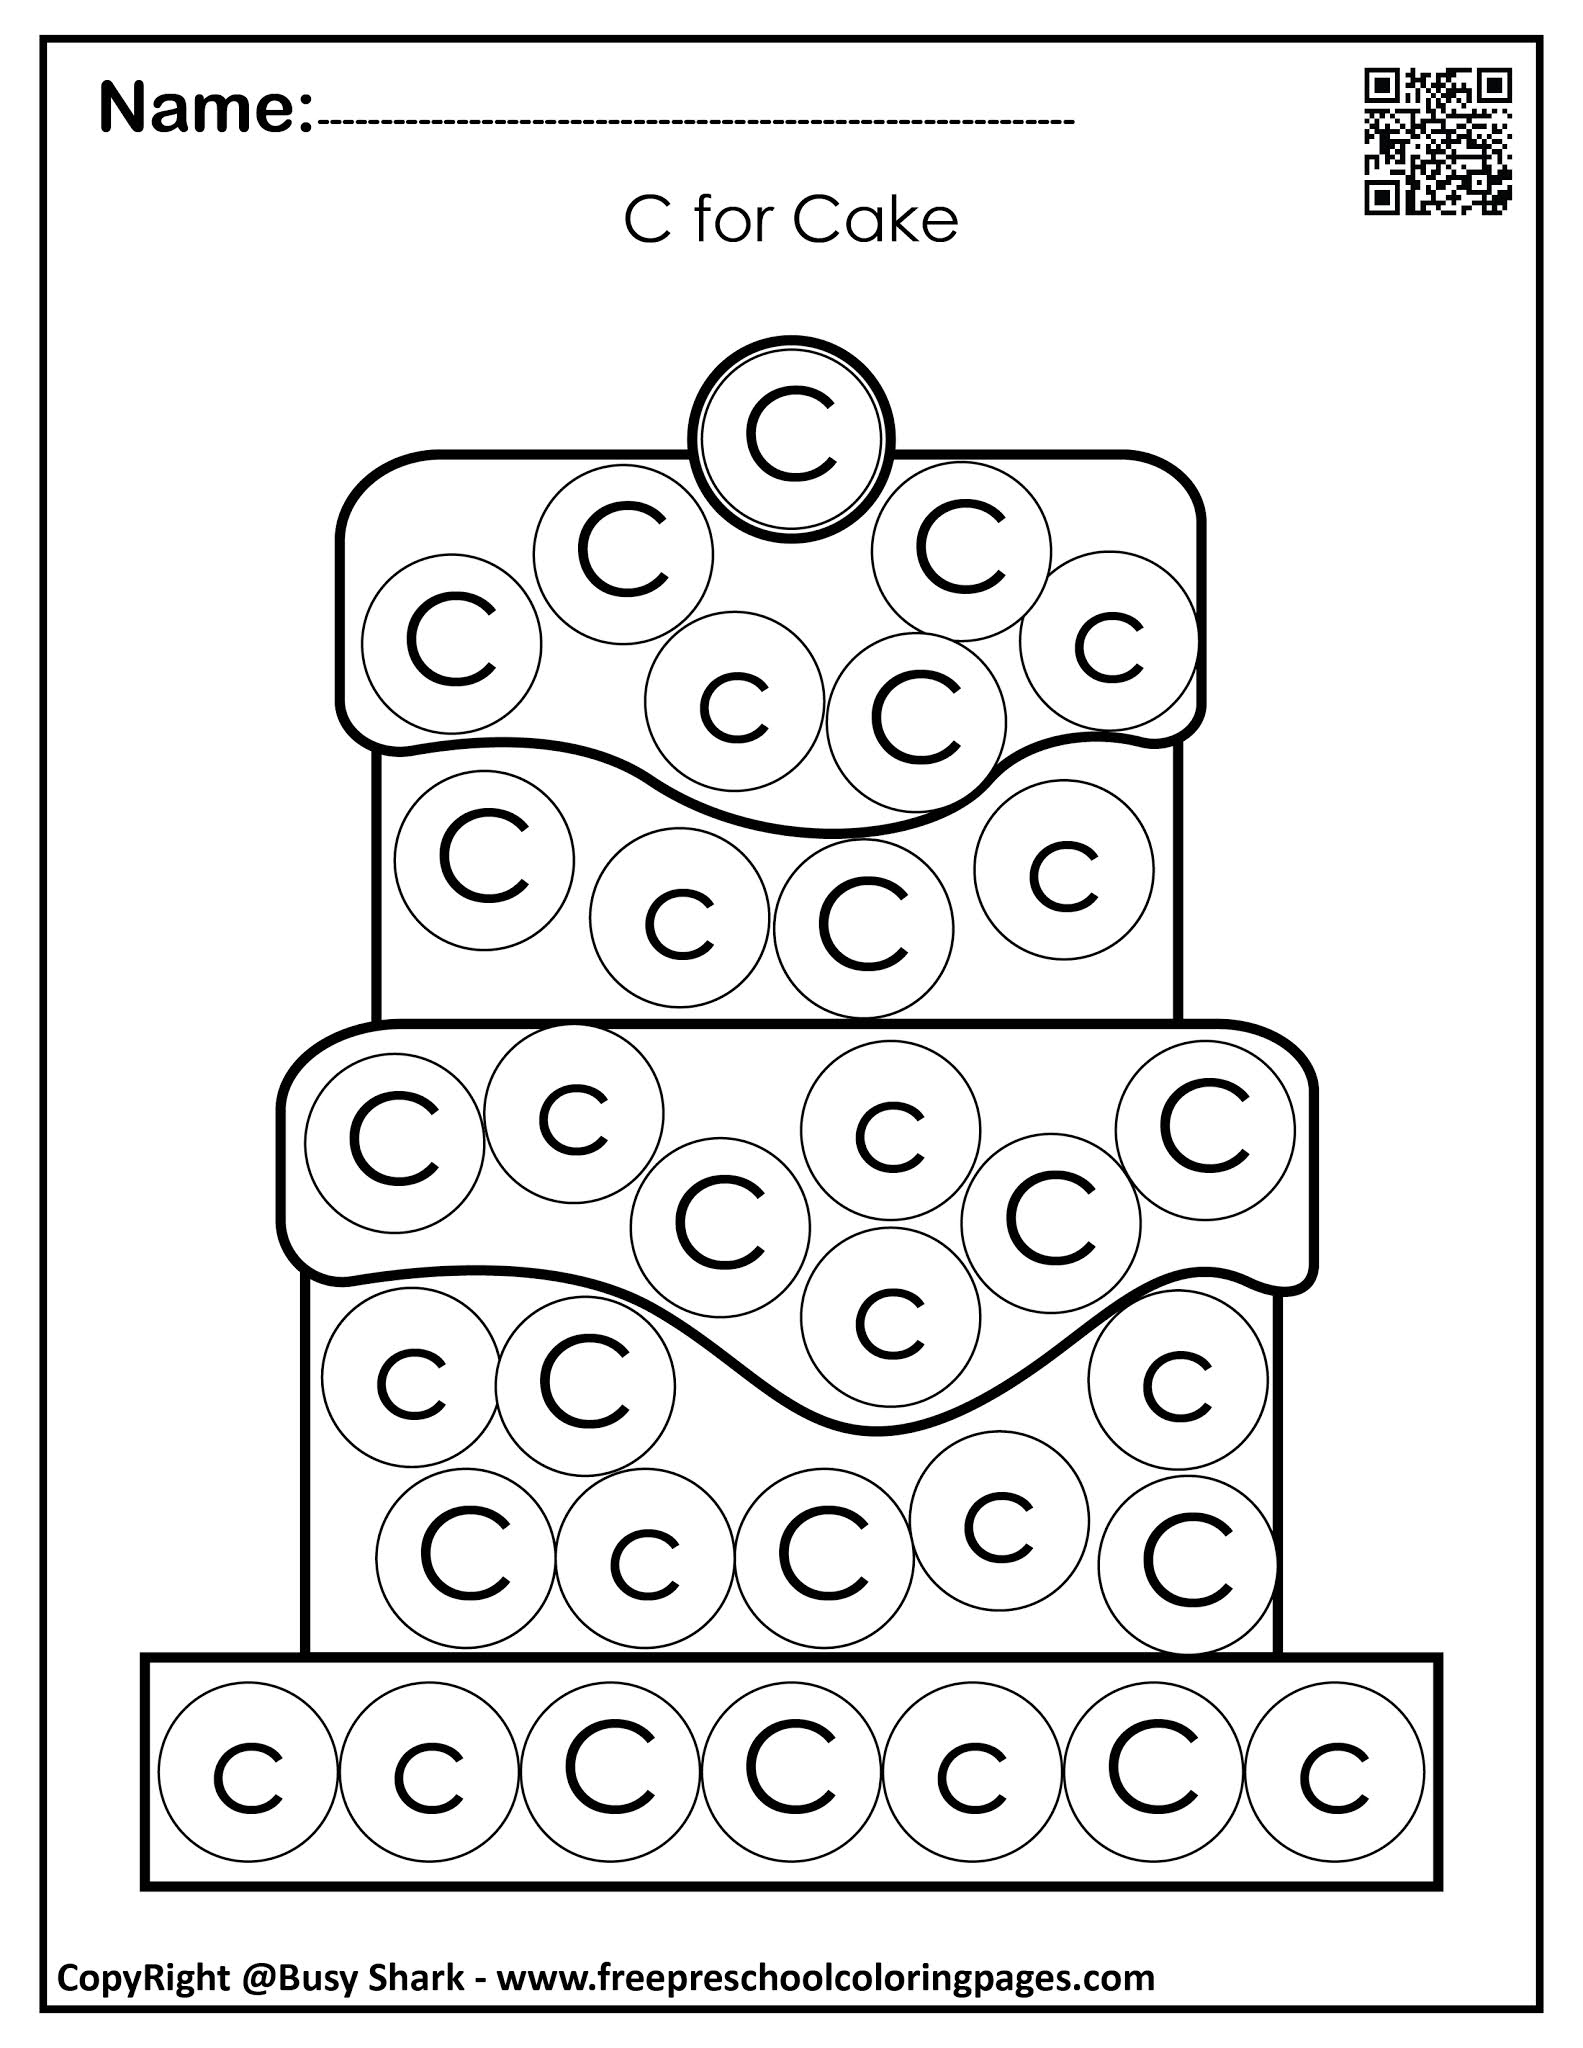 set-of-letter-c-10-free-dot-markers-coloring-pages